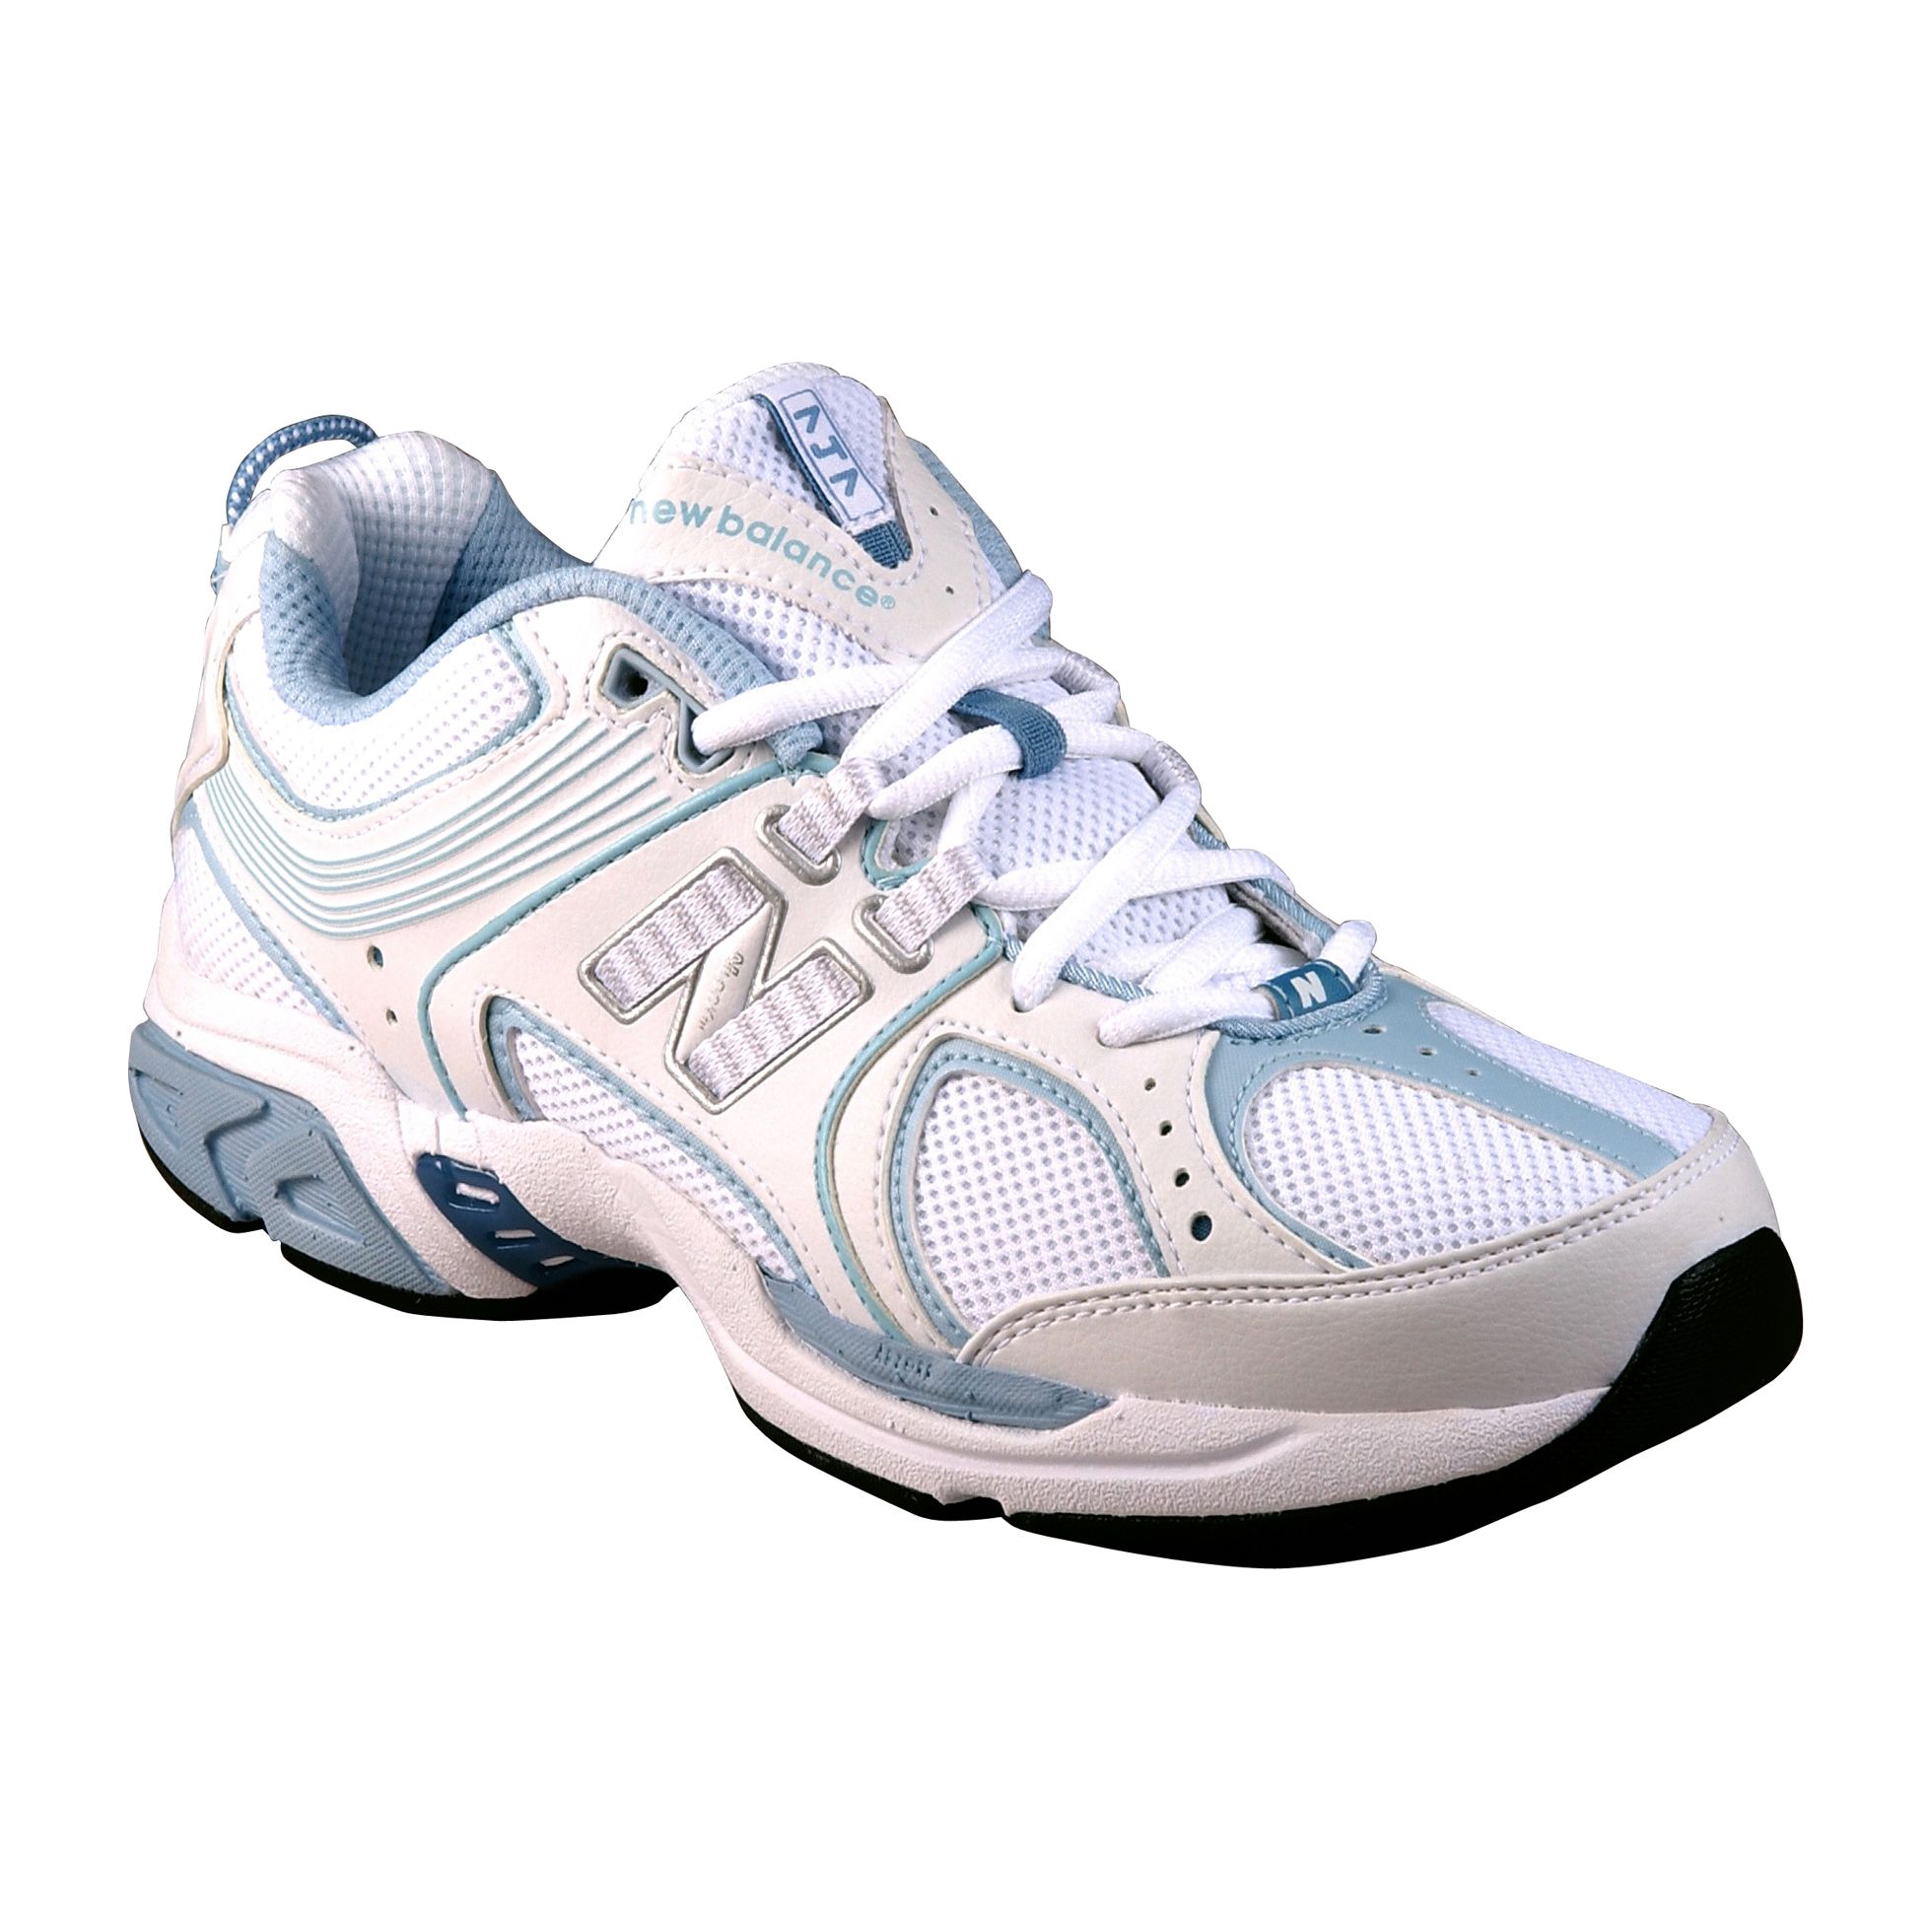 New Balance 747 - White, Blue - Clothing, Shoes \u0026 Jewelry - Shoes - Women's  Shoes - Women's Sneakers \u0026 Athletic Shoes